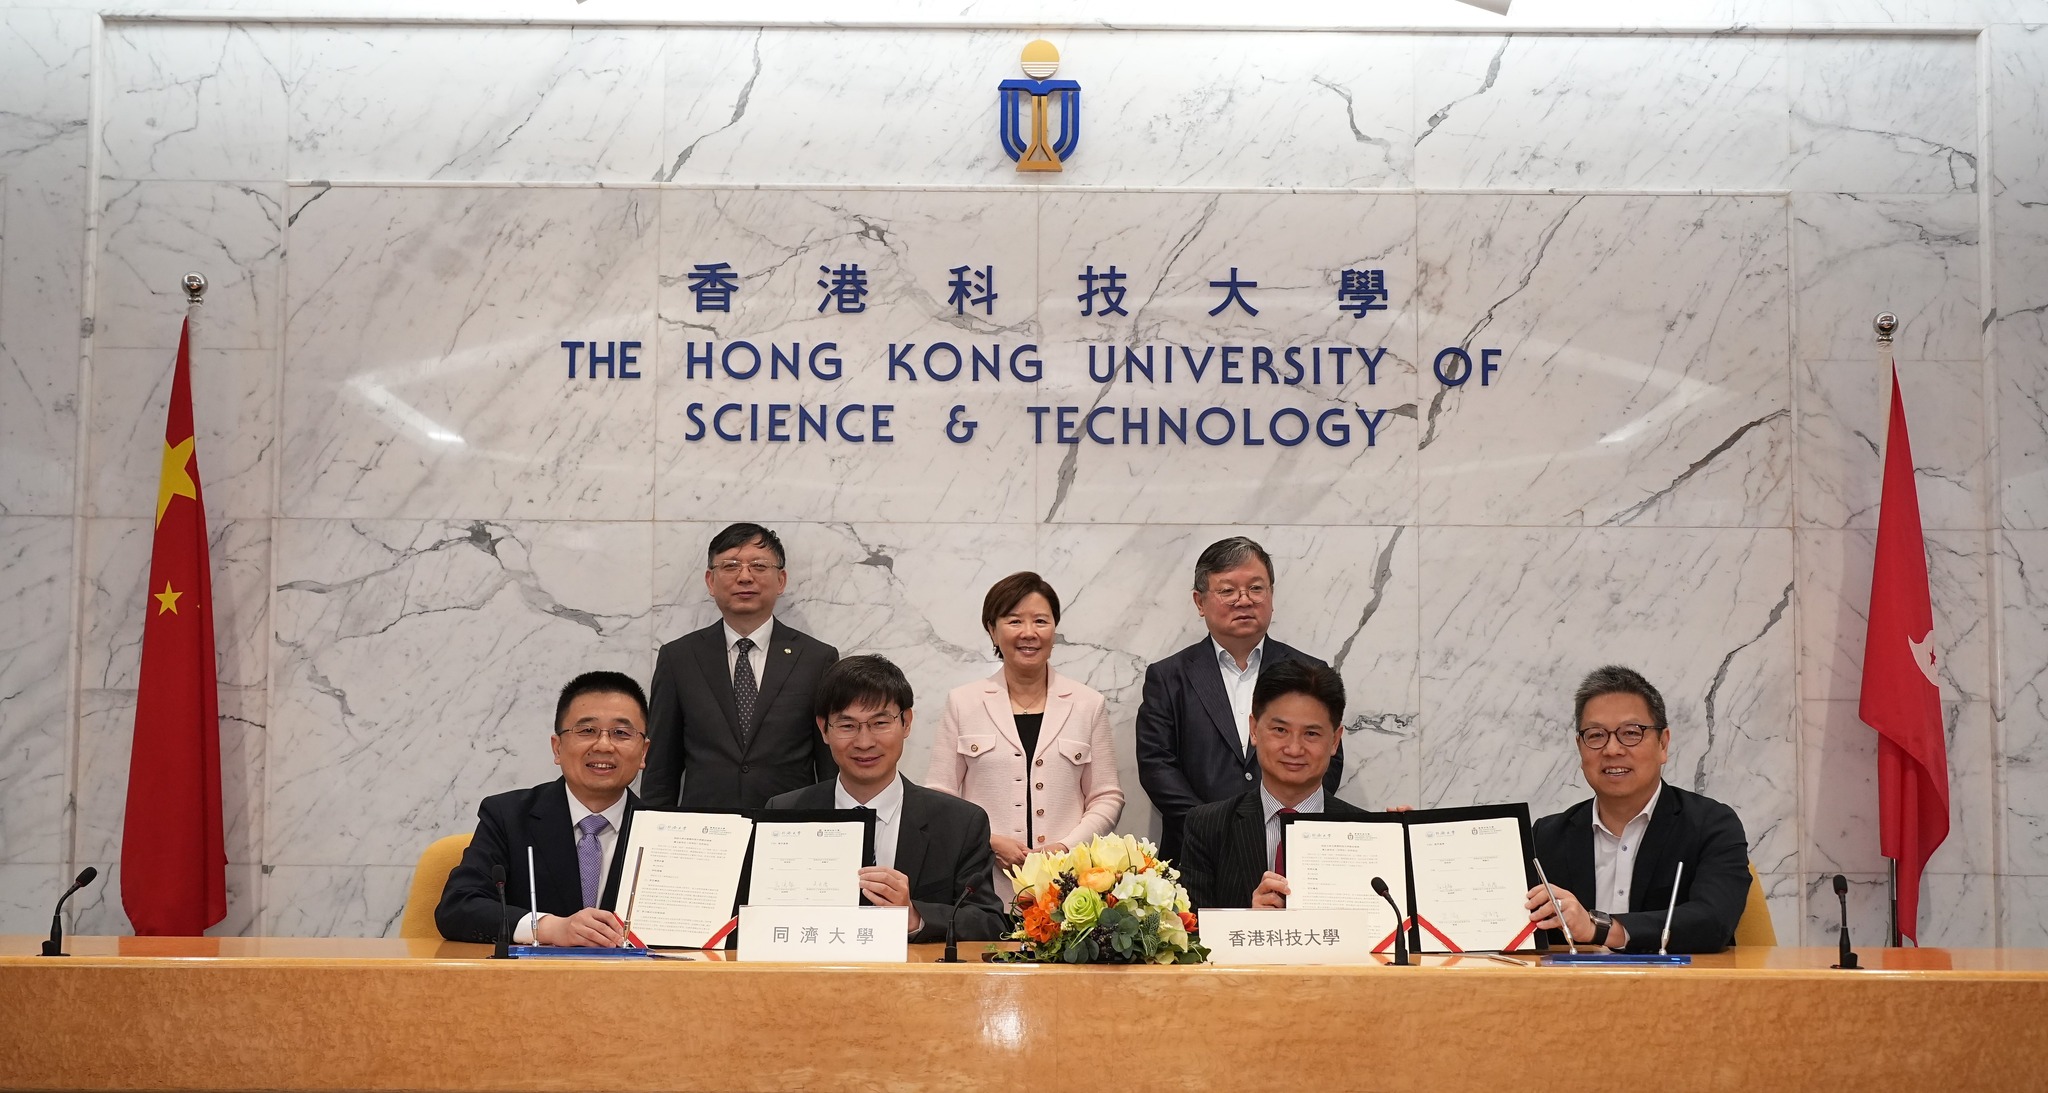 Tongji University signed joint training programs with the School of Engineering and the School of Business and Management at HKUST. 